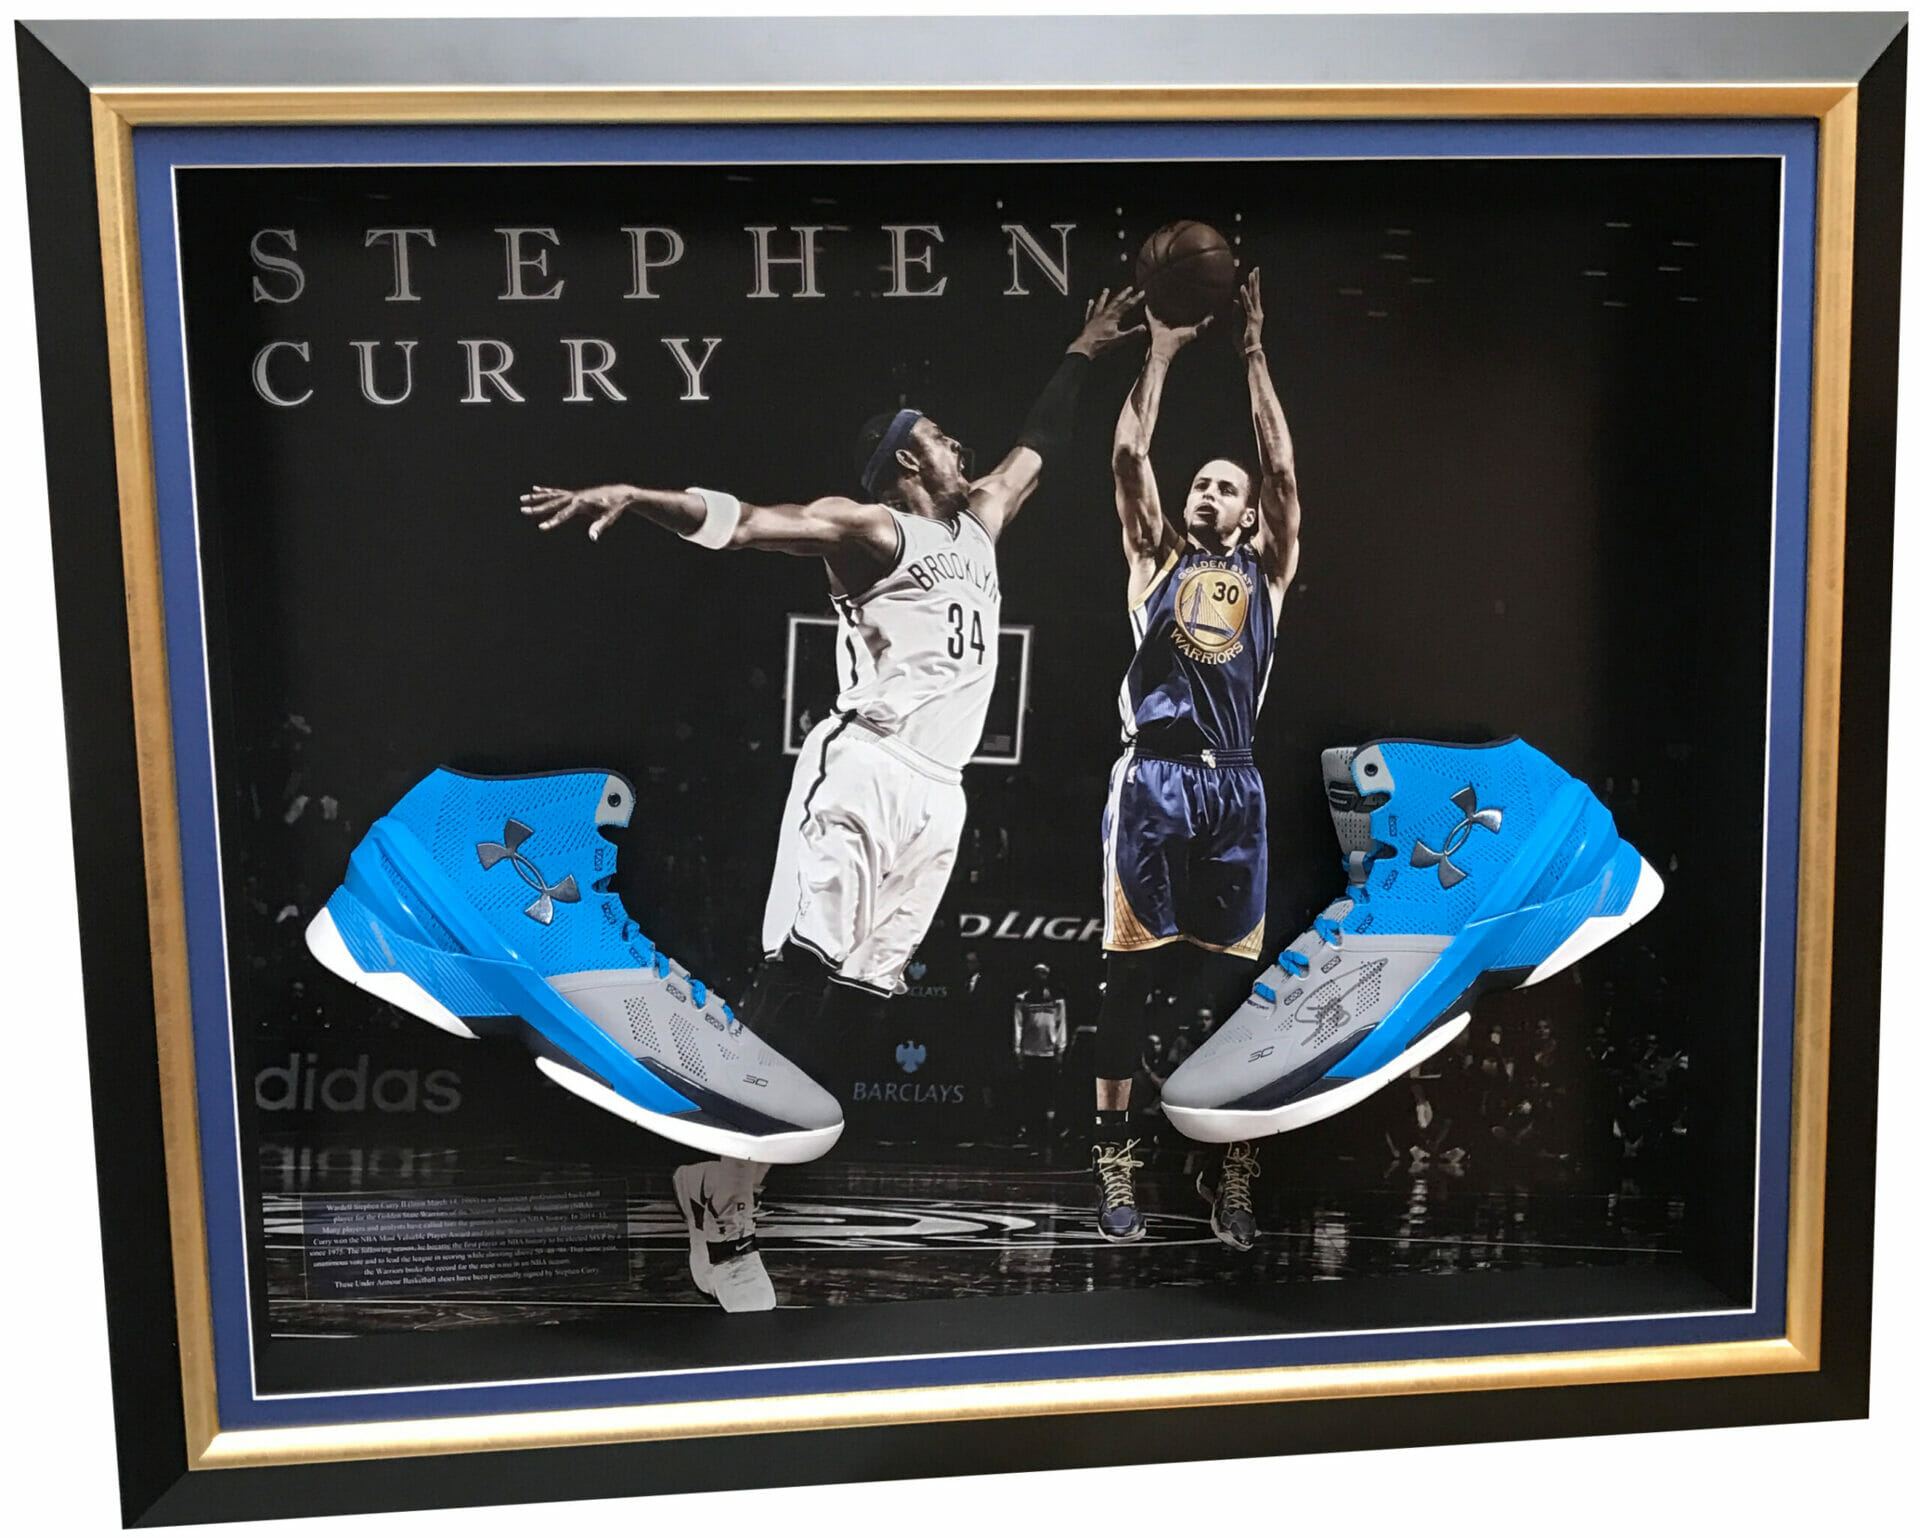 Stephen Curry Signed Curry 3 Under Armor Basketball Shoe (Steiner COA)